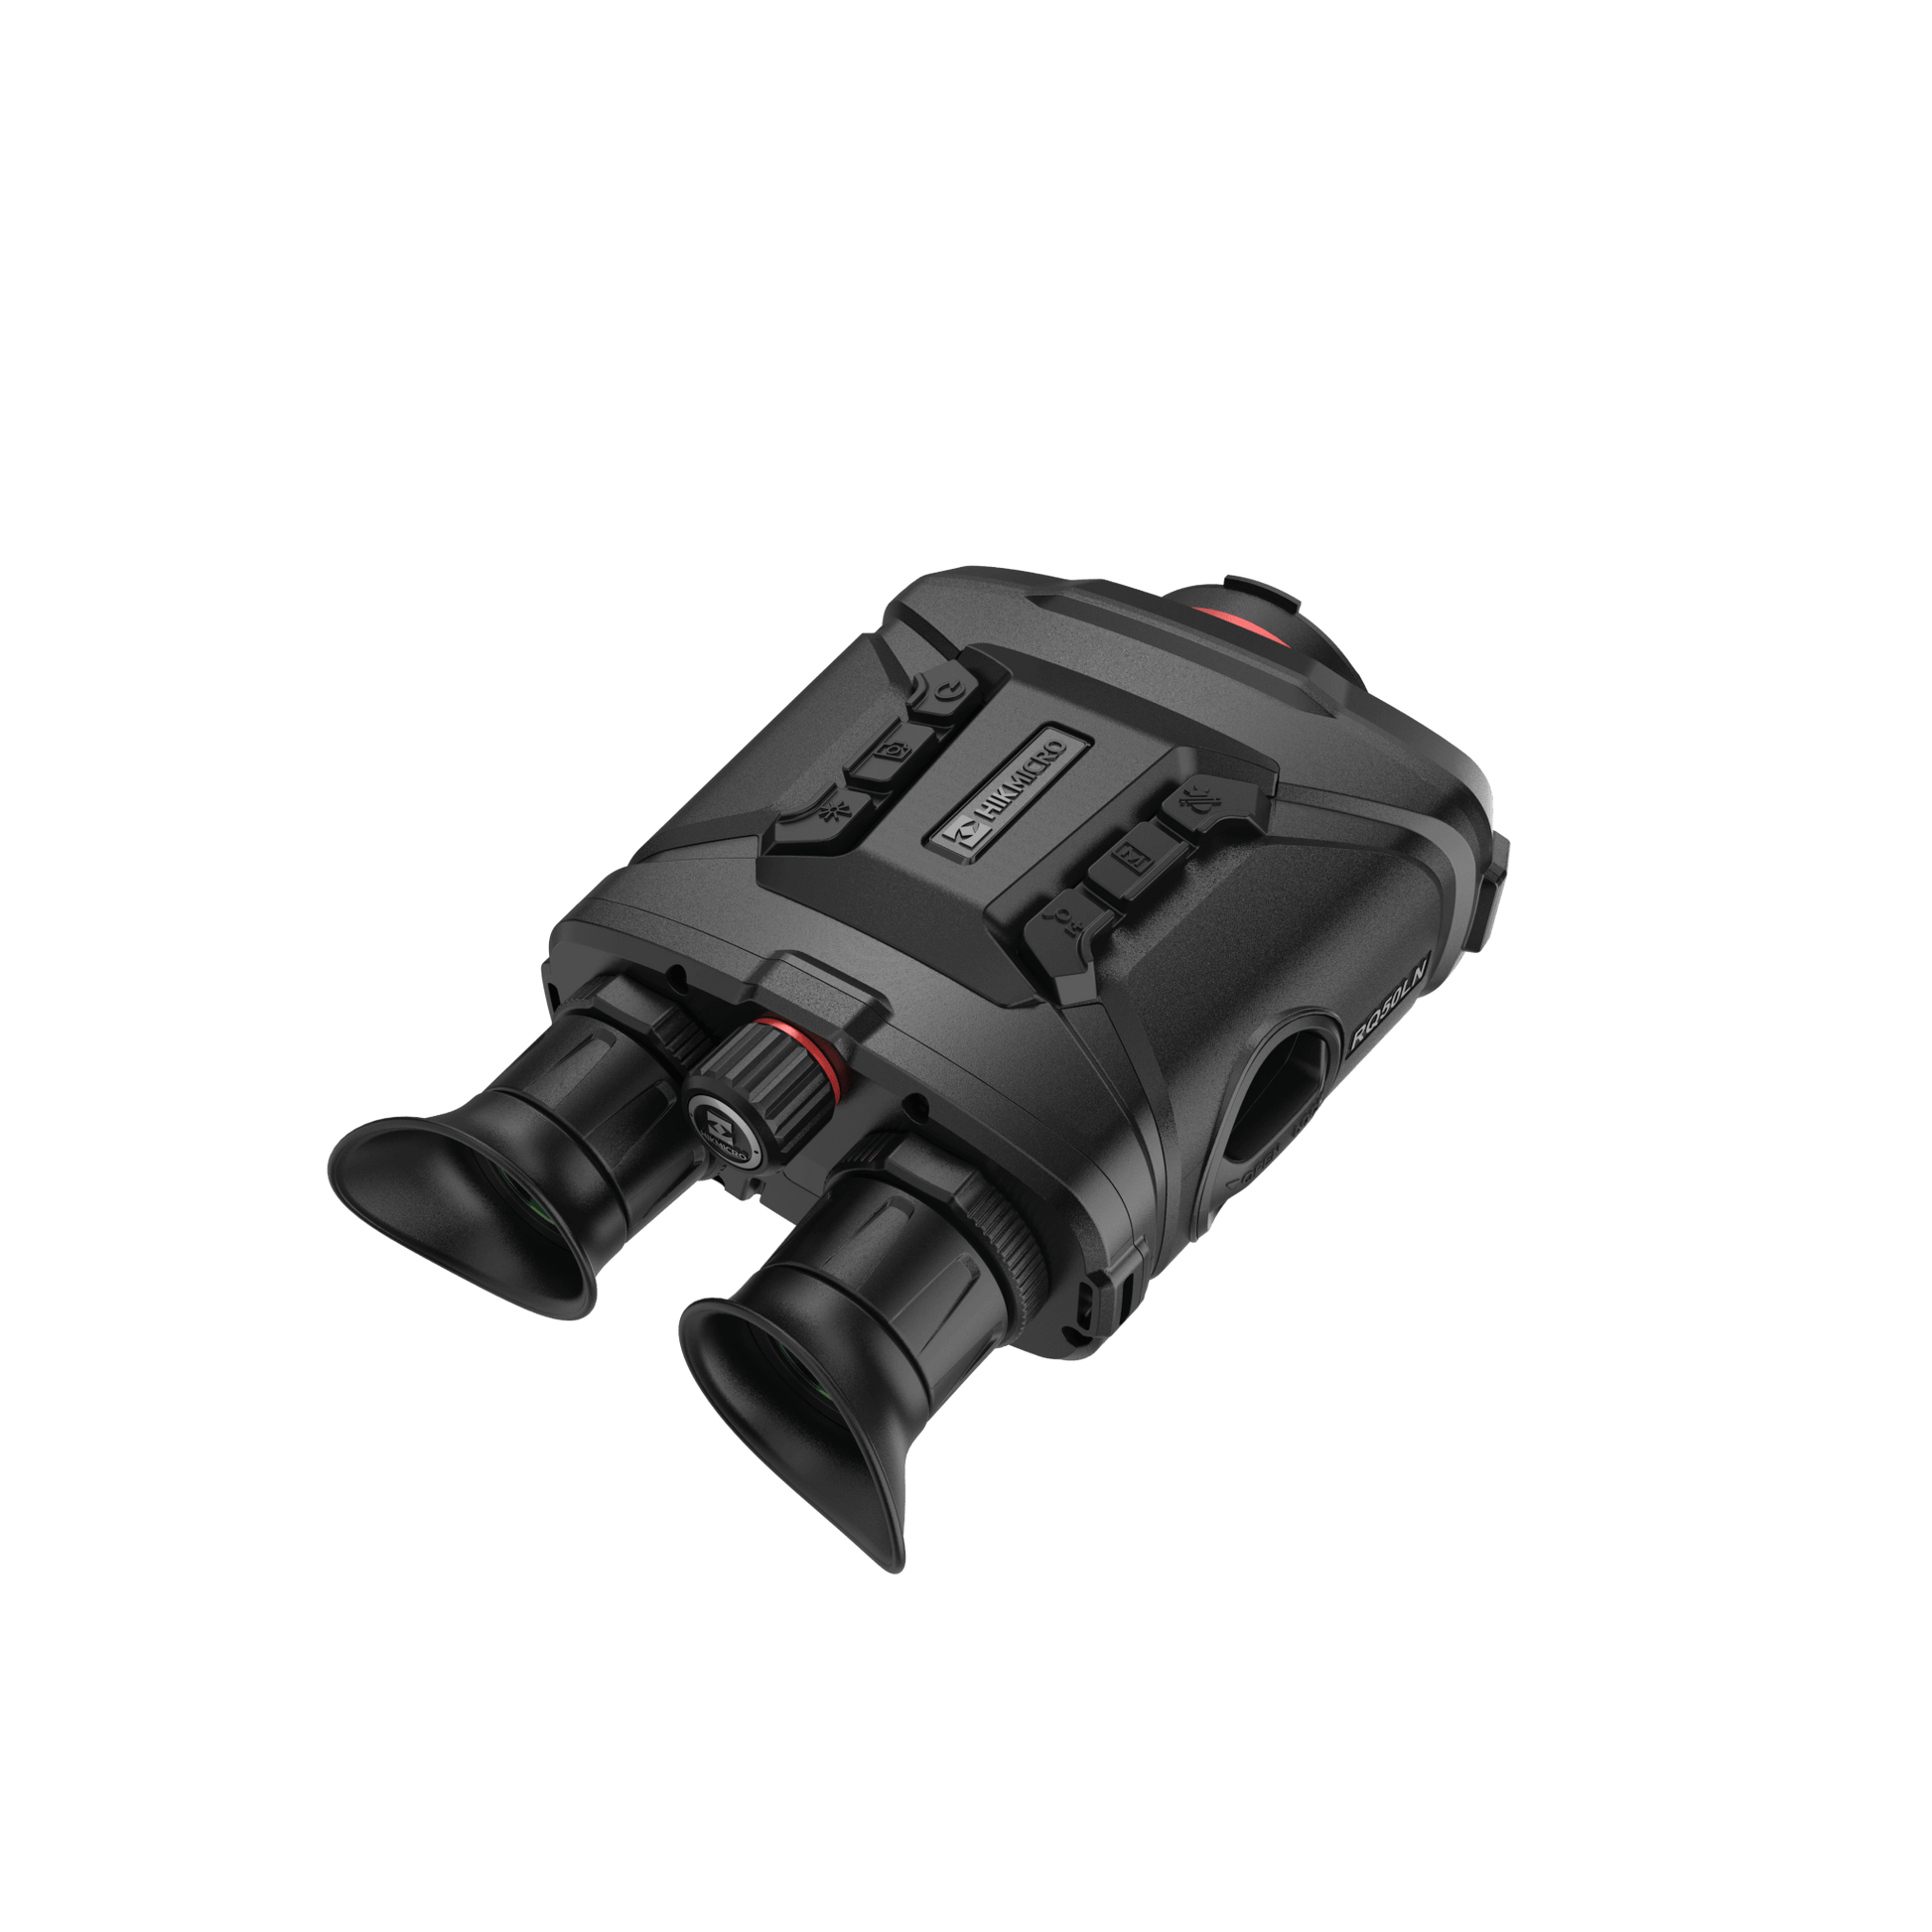 HikMicro Raptor RH50 handheld thermal binocular with infrared and optical capabilities - Rear Right View